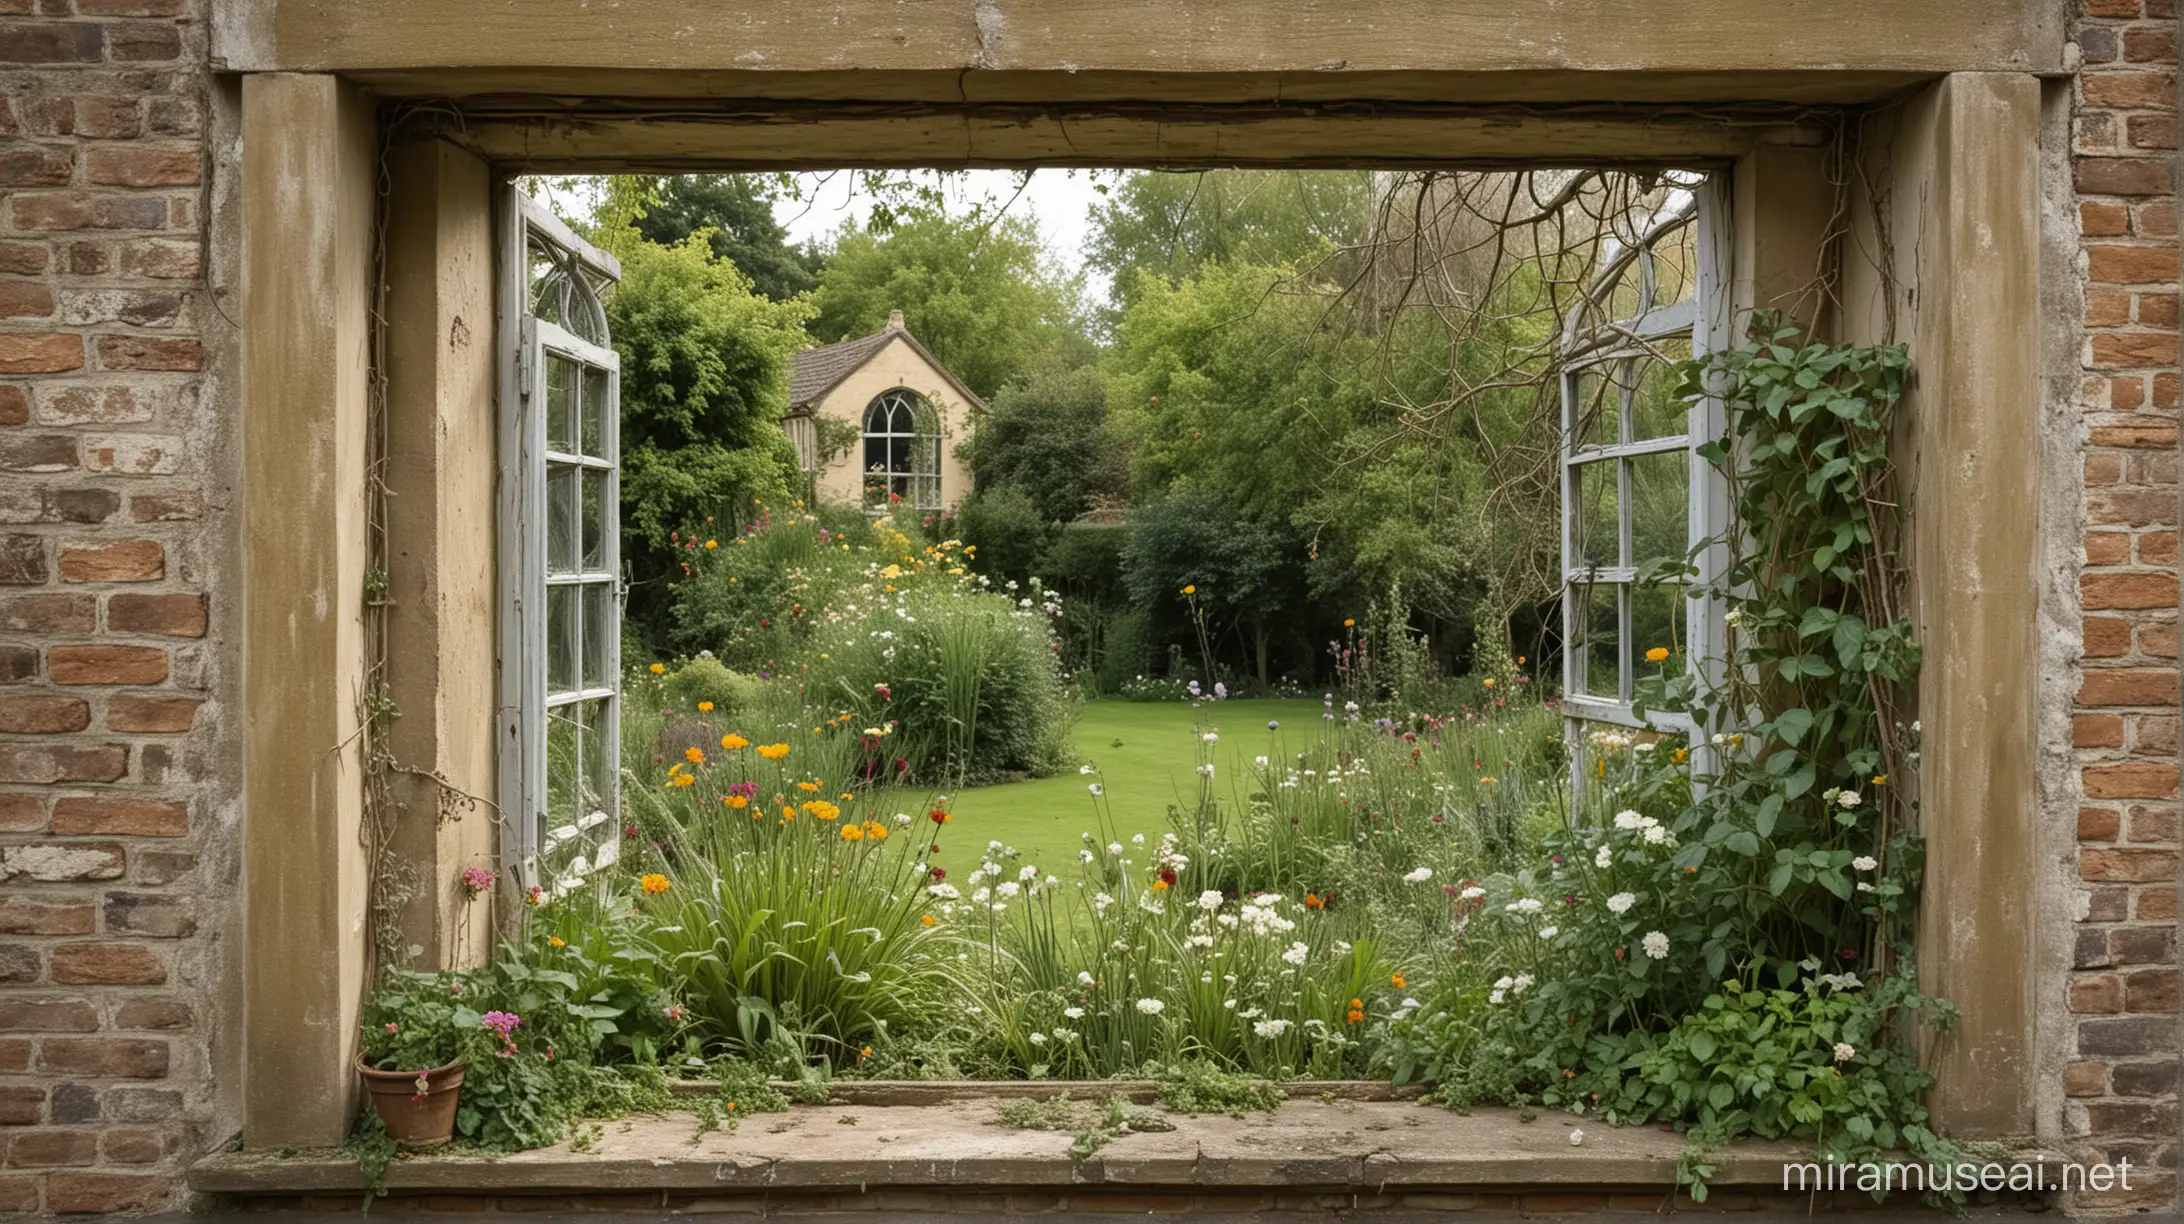 Looking out through a  Regency style window to a well cultivated English garden window is old and worn with paint flaking off cob webs around the window